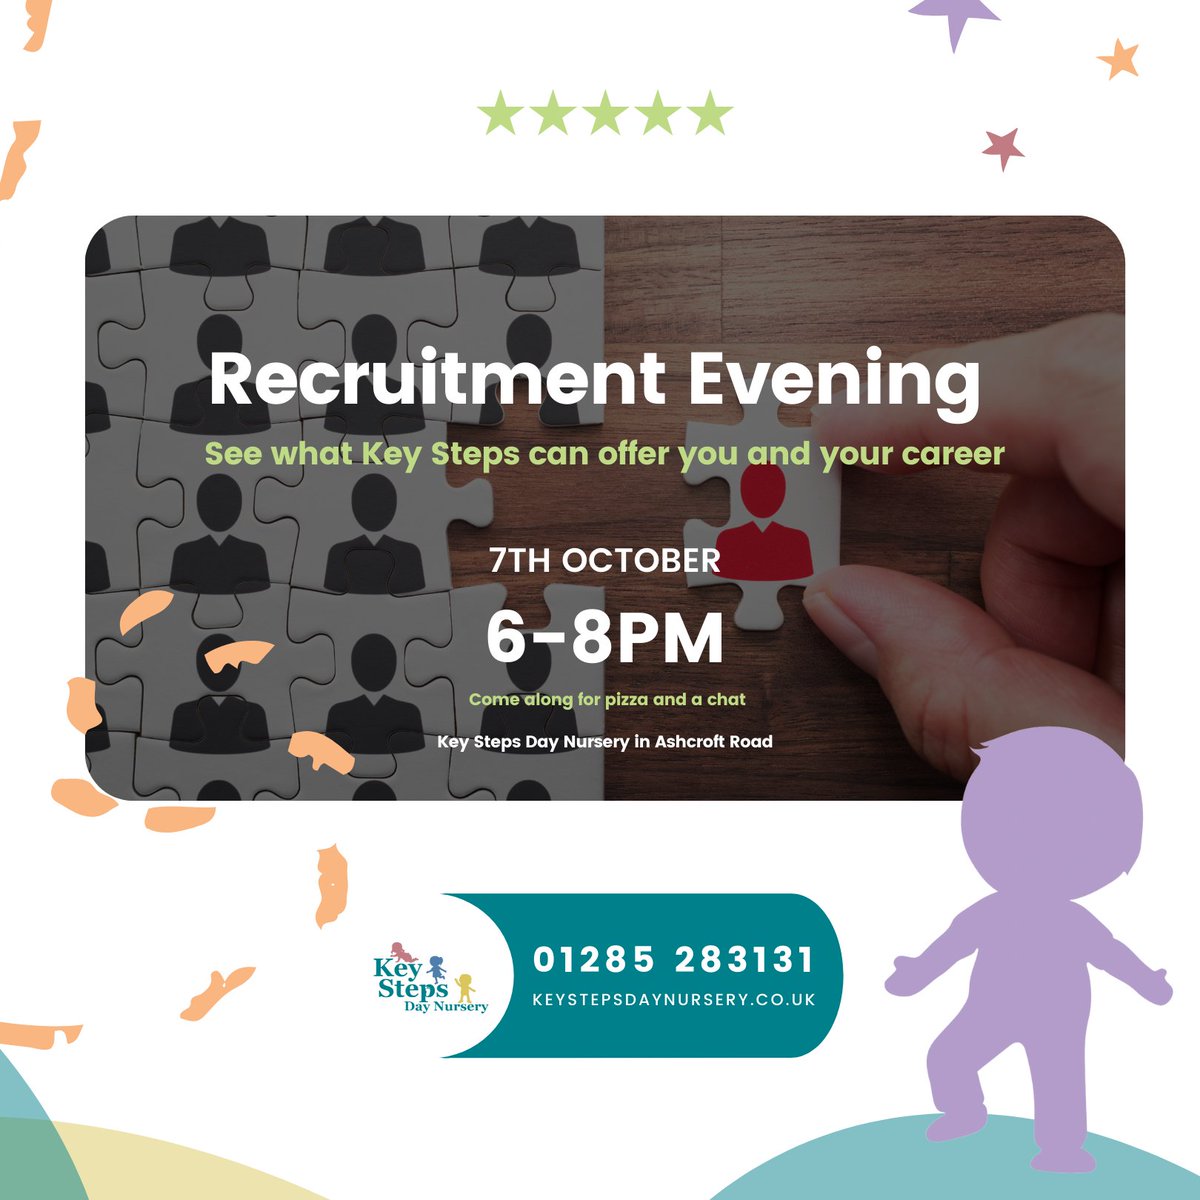 We are growing! 
Recruitment evening @Keysteps Day Nursery Cirencester
See what Key Steps can offer you and your career
7th October 6-8pm come along for pizza and a chat
👍
Visit our careers  page online: rfr.bz/t3aex7e
 #love #cirencesterrocks #cirencestermums